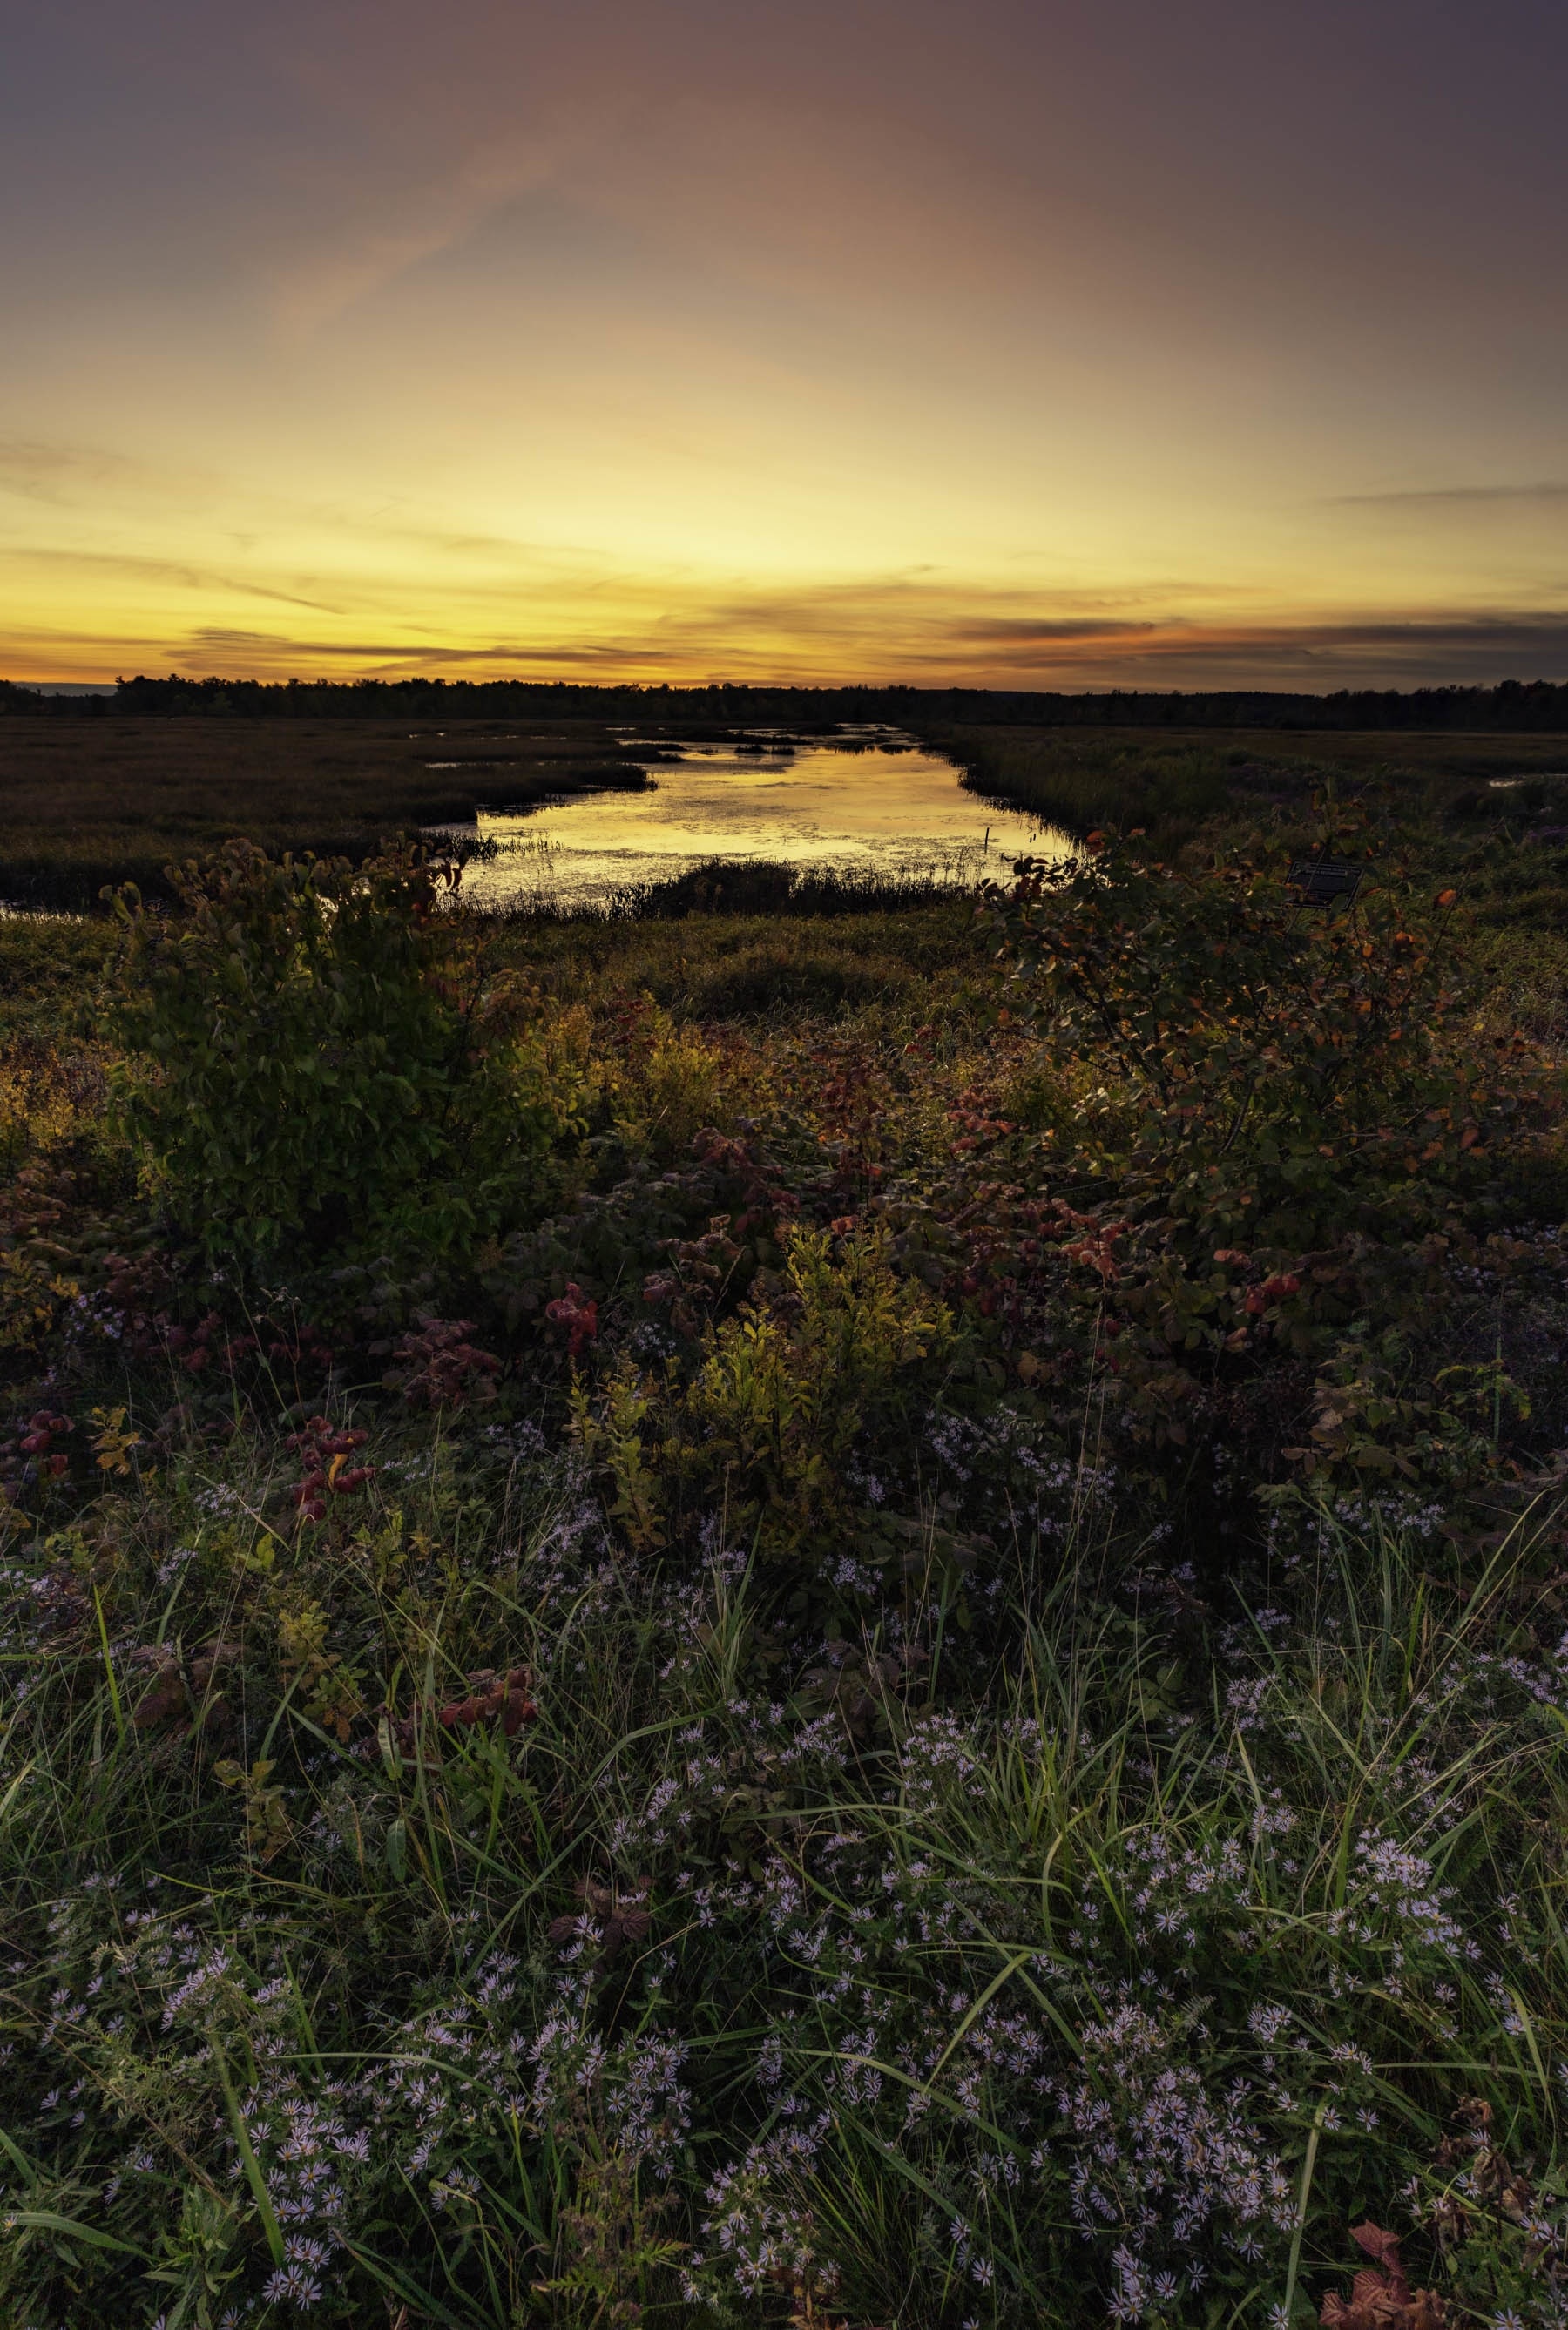 As we got close to Canada the Sun went down right over this beautiful NWR. On both sides of the road were pretty lowlands, and due to the crazy summer flowers were still blooming instead of fall color starting. 